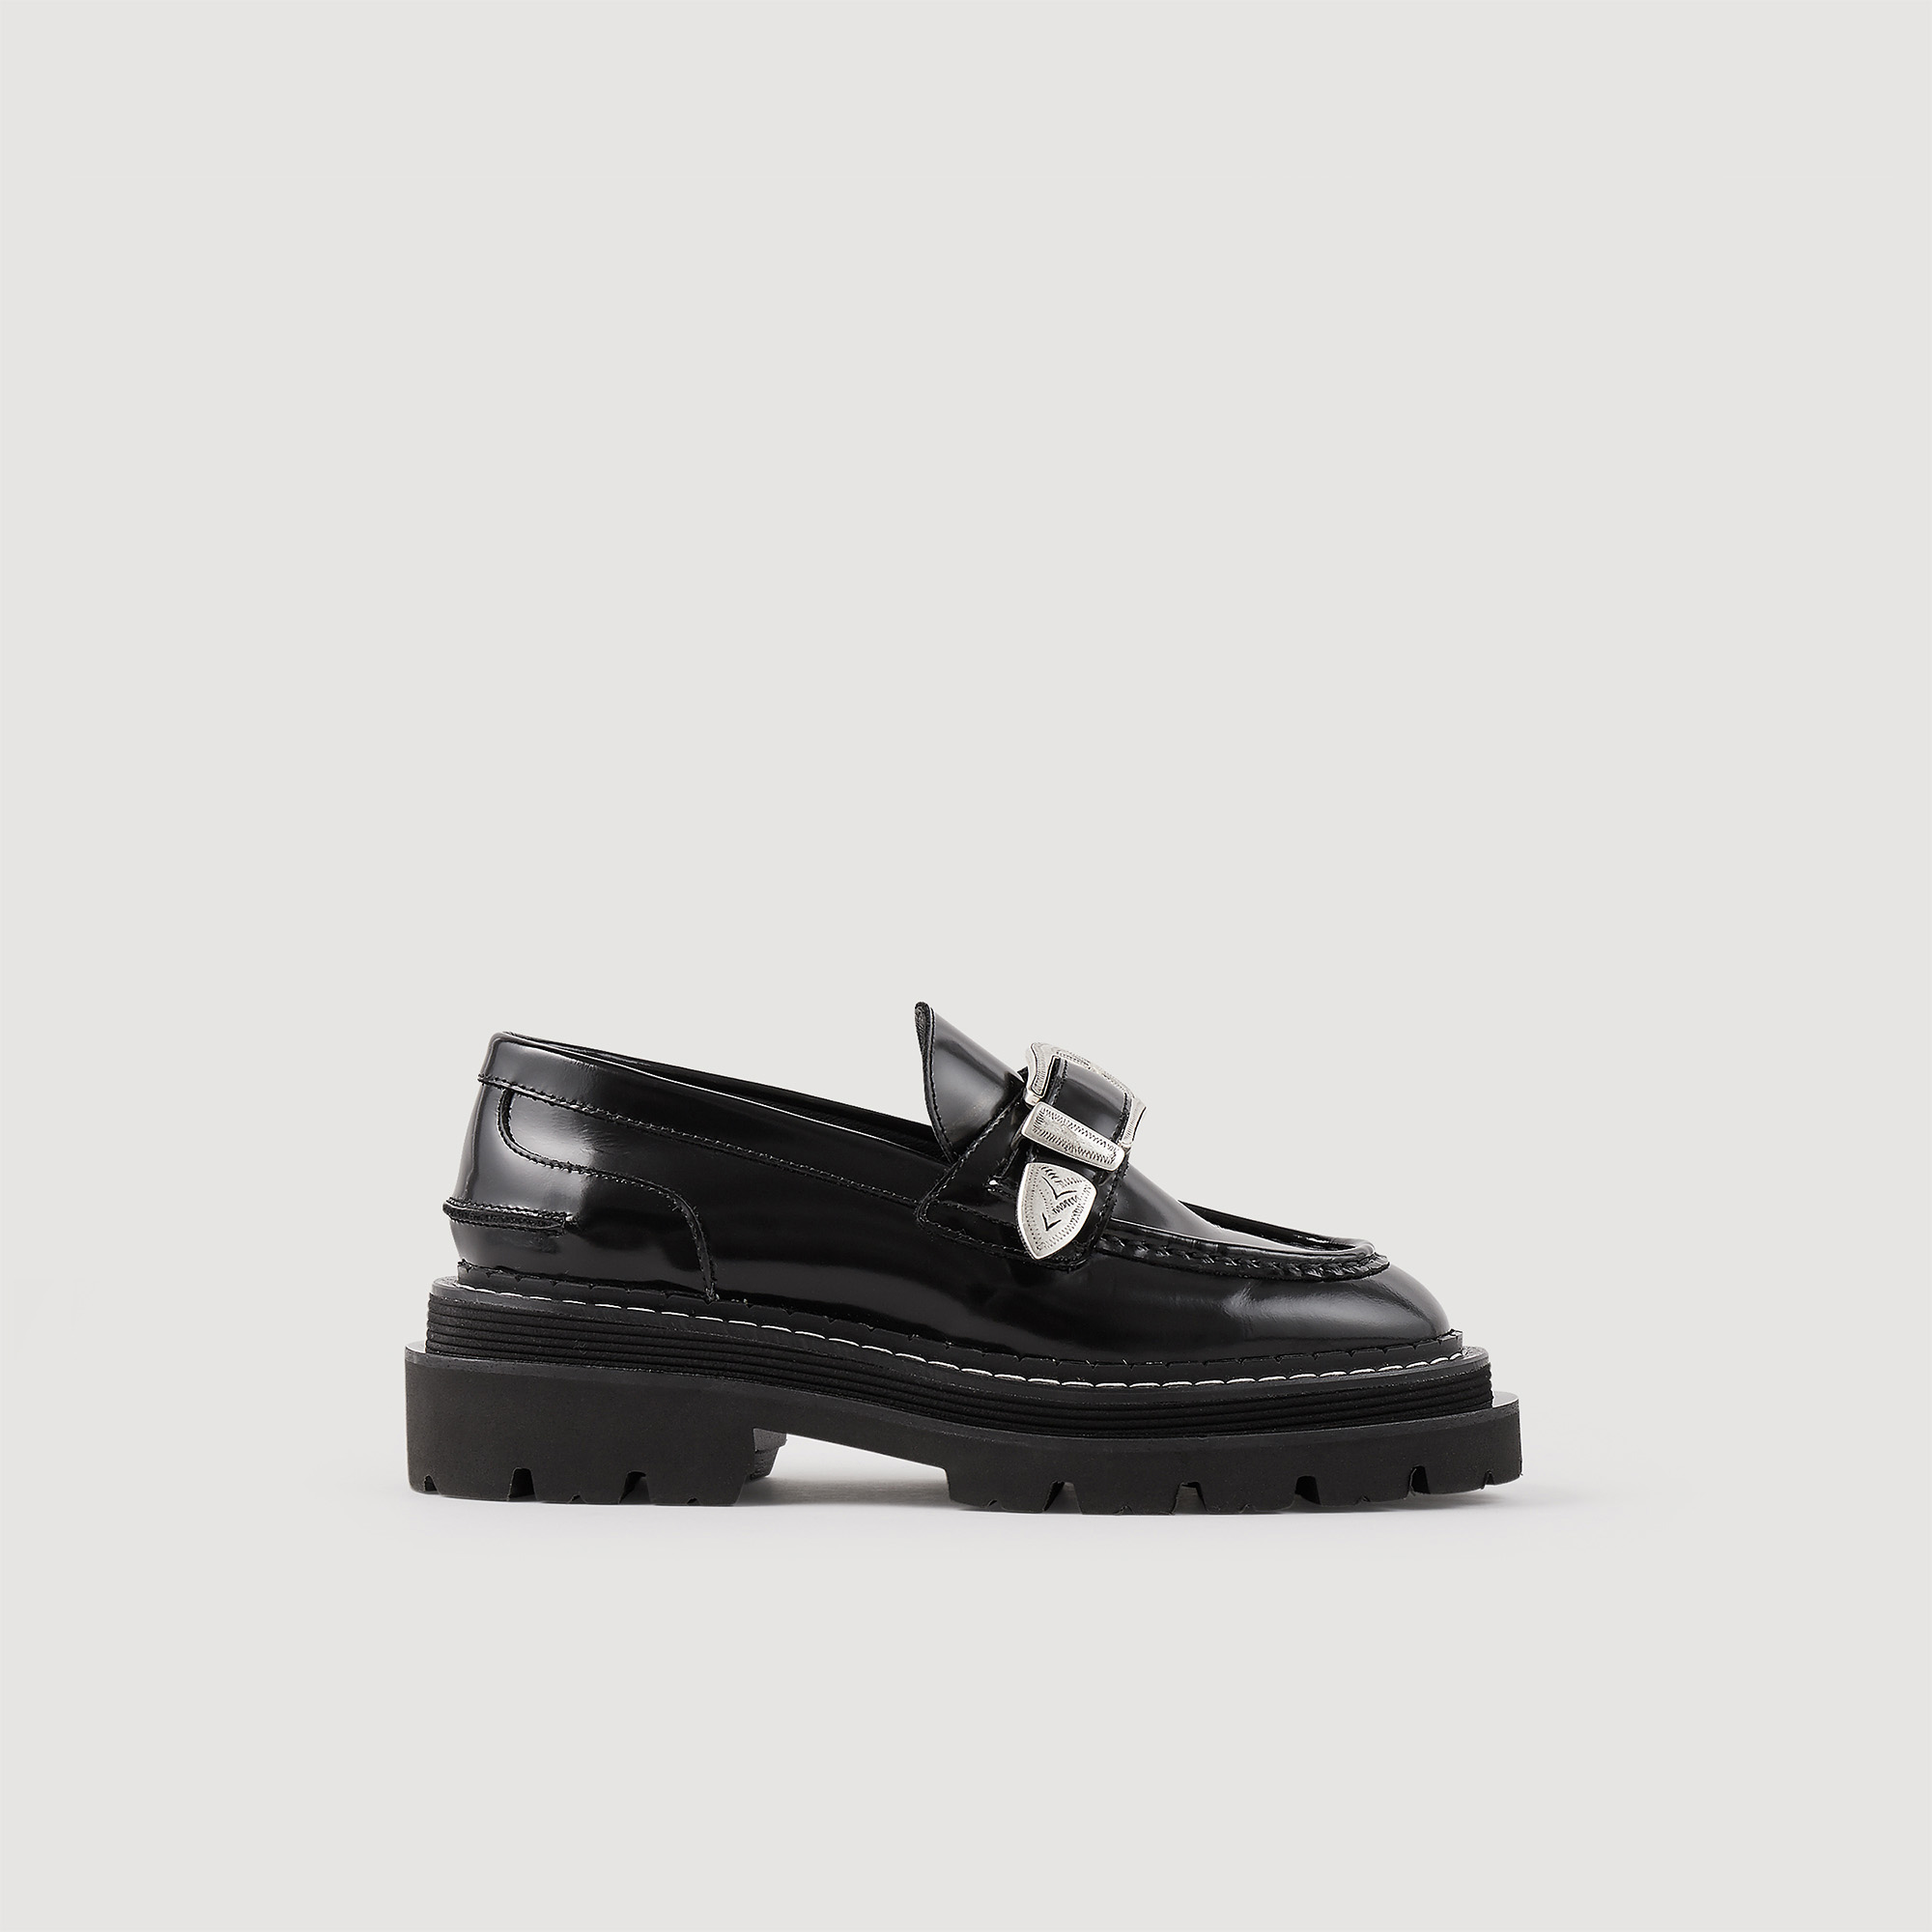 Sandro rubber Shiny leather loafers with a thick sole with a tread and embellished with a metal western buckle strap